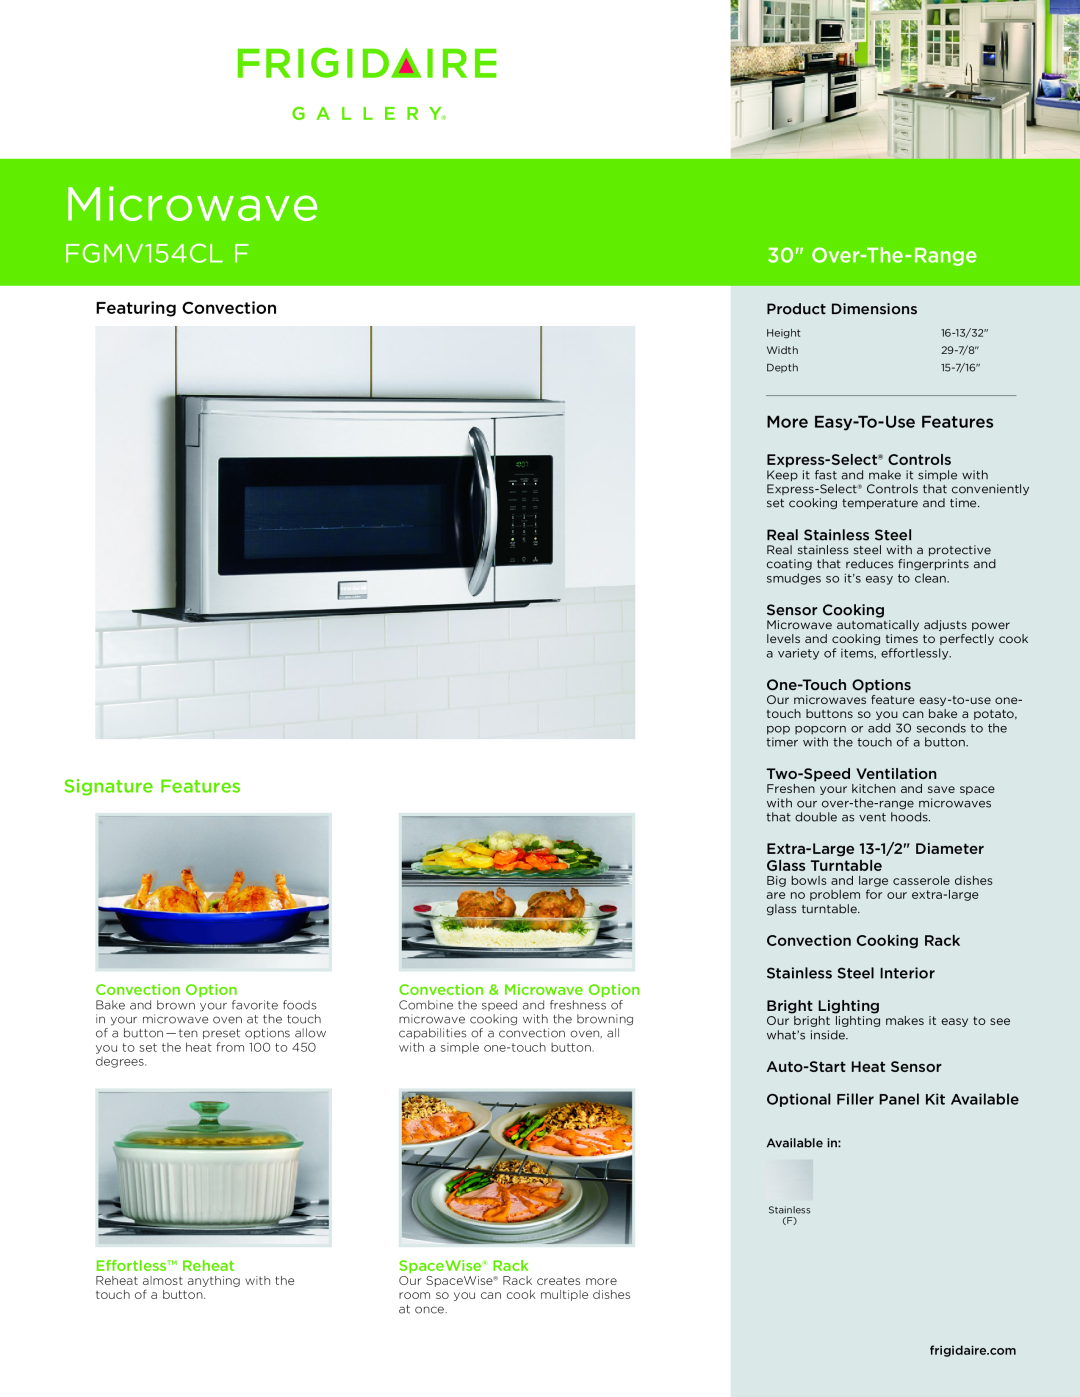 Frigidaire FGMV154CL F dimensions Microwave, Over-The-Range, Signature Features, Featuring Convection, Convection Option 